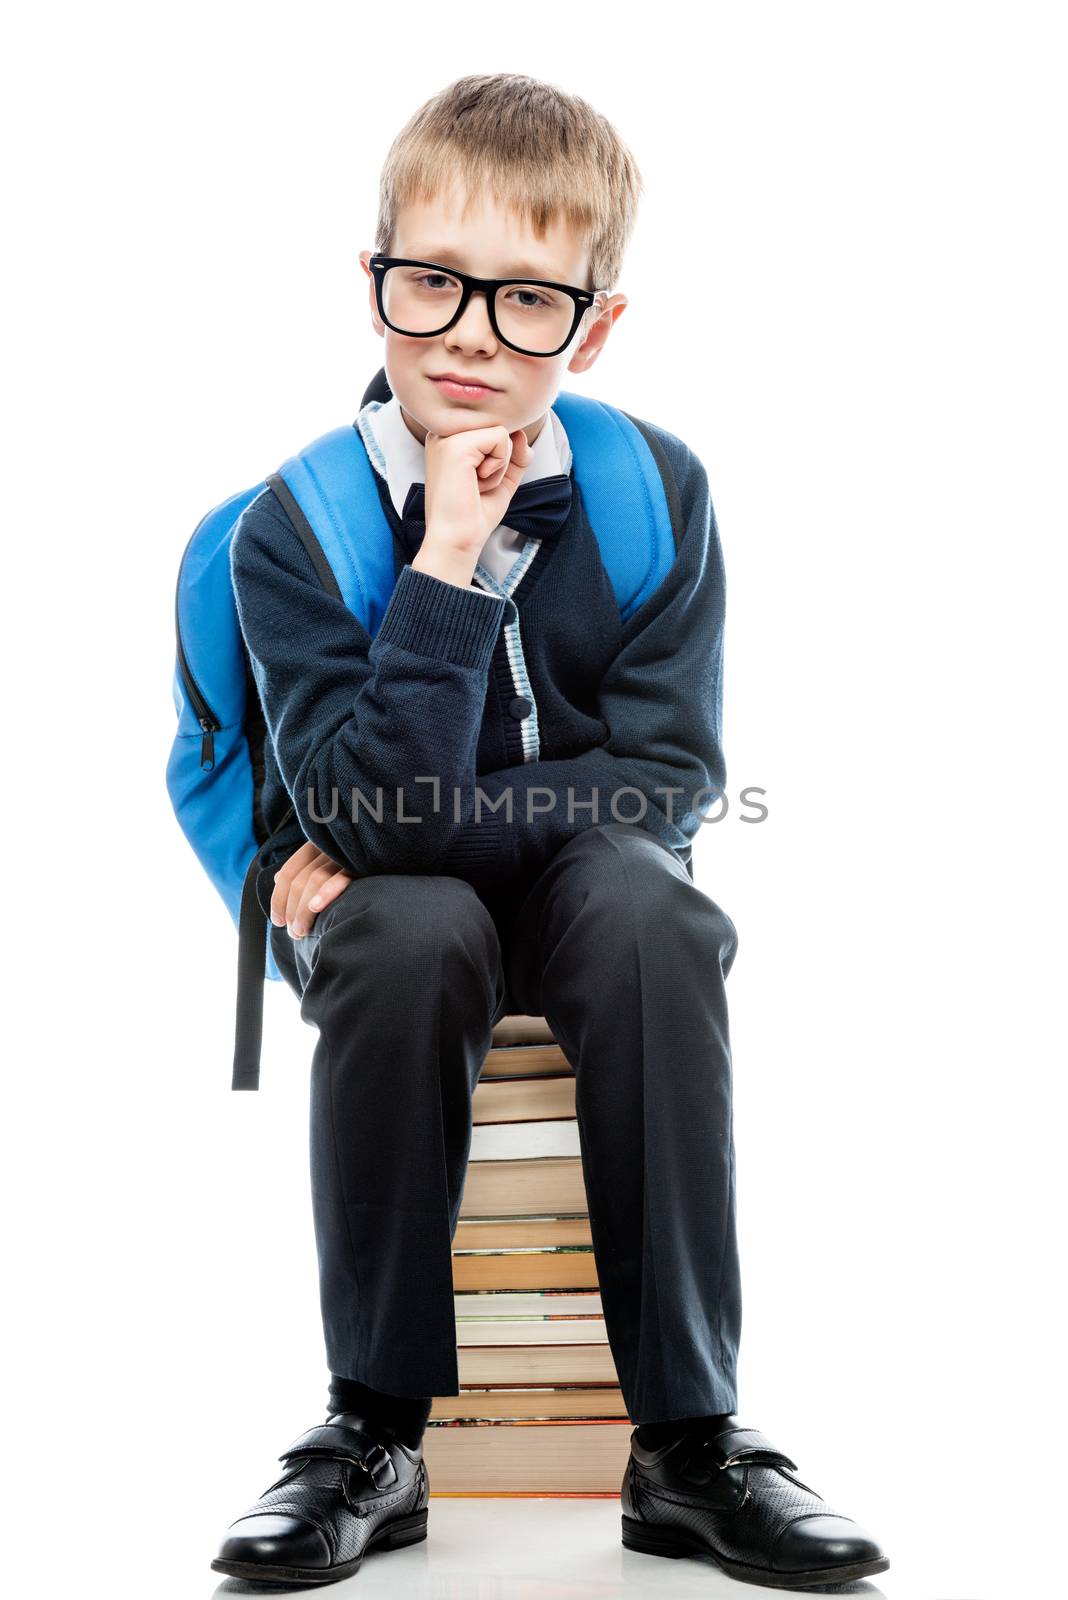 portrait of a schoolboy with glasses sitting on a pile of books on a white background